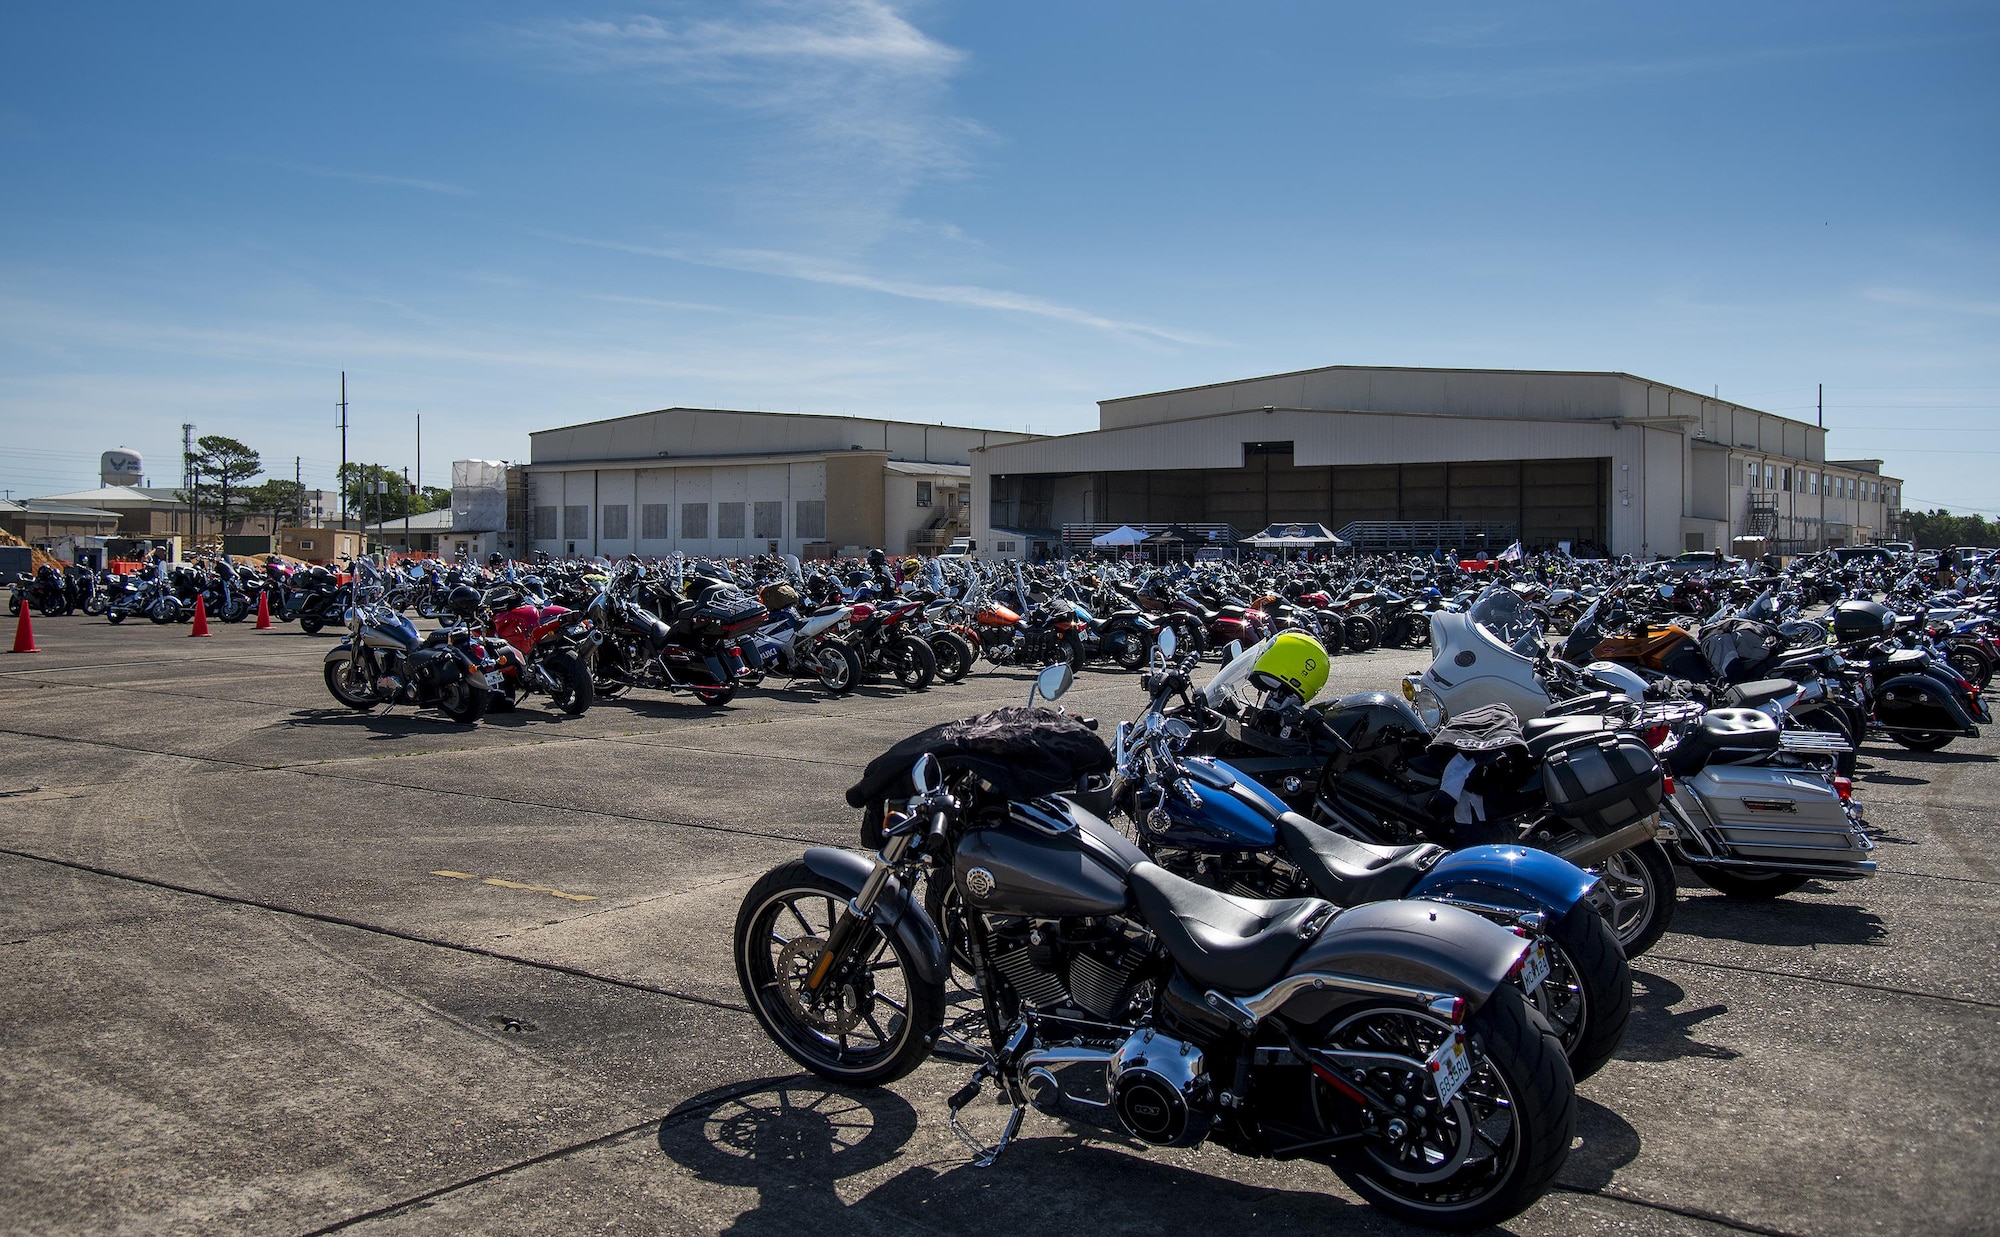 More than 500 bikes park in front of the hangar during the annual motorcycle safety rally at Eglin Air Force Base, Fla., April 14.  The event meets the annual safety briefing requirement for base riders.  (U.S. Air Force photo/Samuel King Jr.)